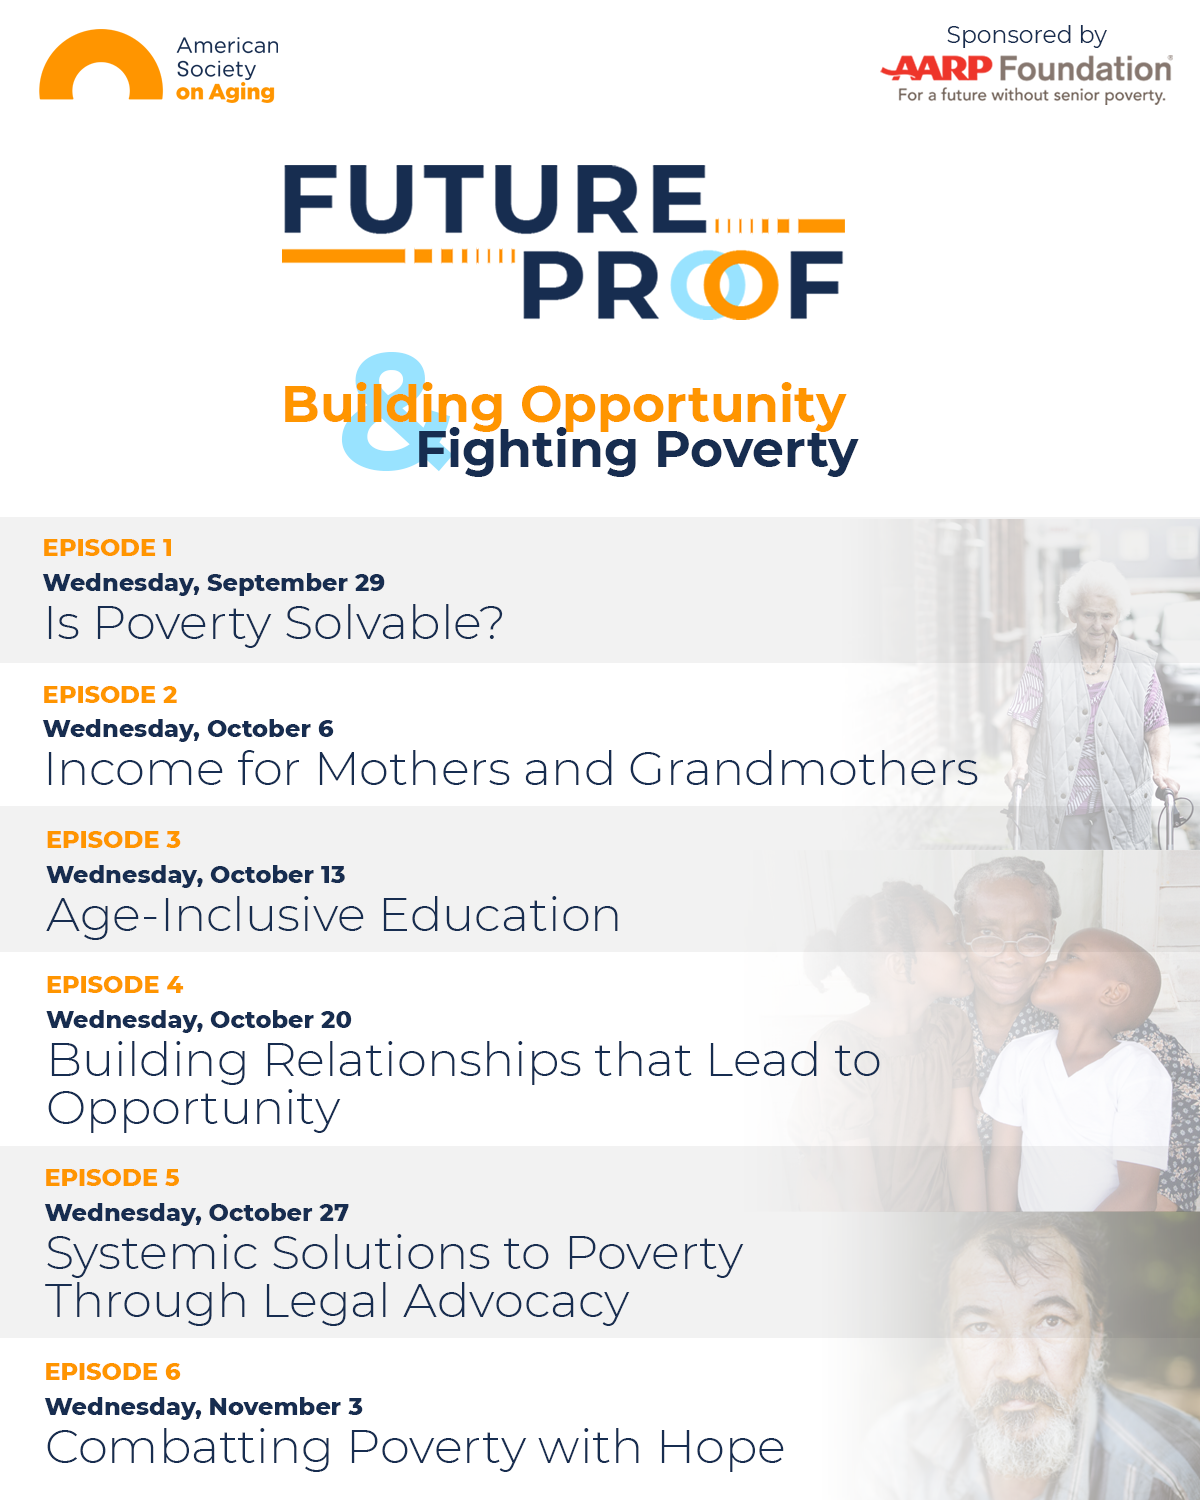 Episode Guide: Episode 1: Wed Sept 29 - Is Poverty Solvable? Episode 2: Wed Oct 6 - Income for Mothers and Grandmothers Episode 3: Wed Oct 13 - Age-Inclusive Education Episode 4: Wed Oct 20 - Building Relationships that Lead to Opportunity Episode 5: Wed Oct 27 - Systemic Solutions to Poverty through Legal Advocacy Episode 6: Wed Nov 3 - Combatting Poverty with Hope